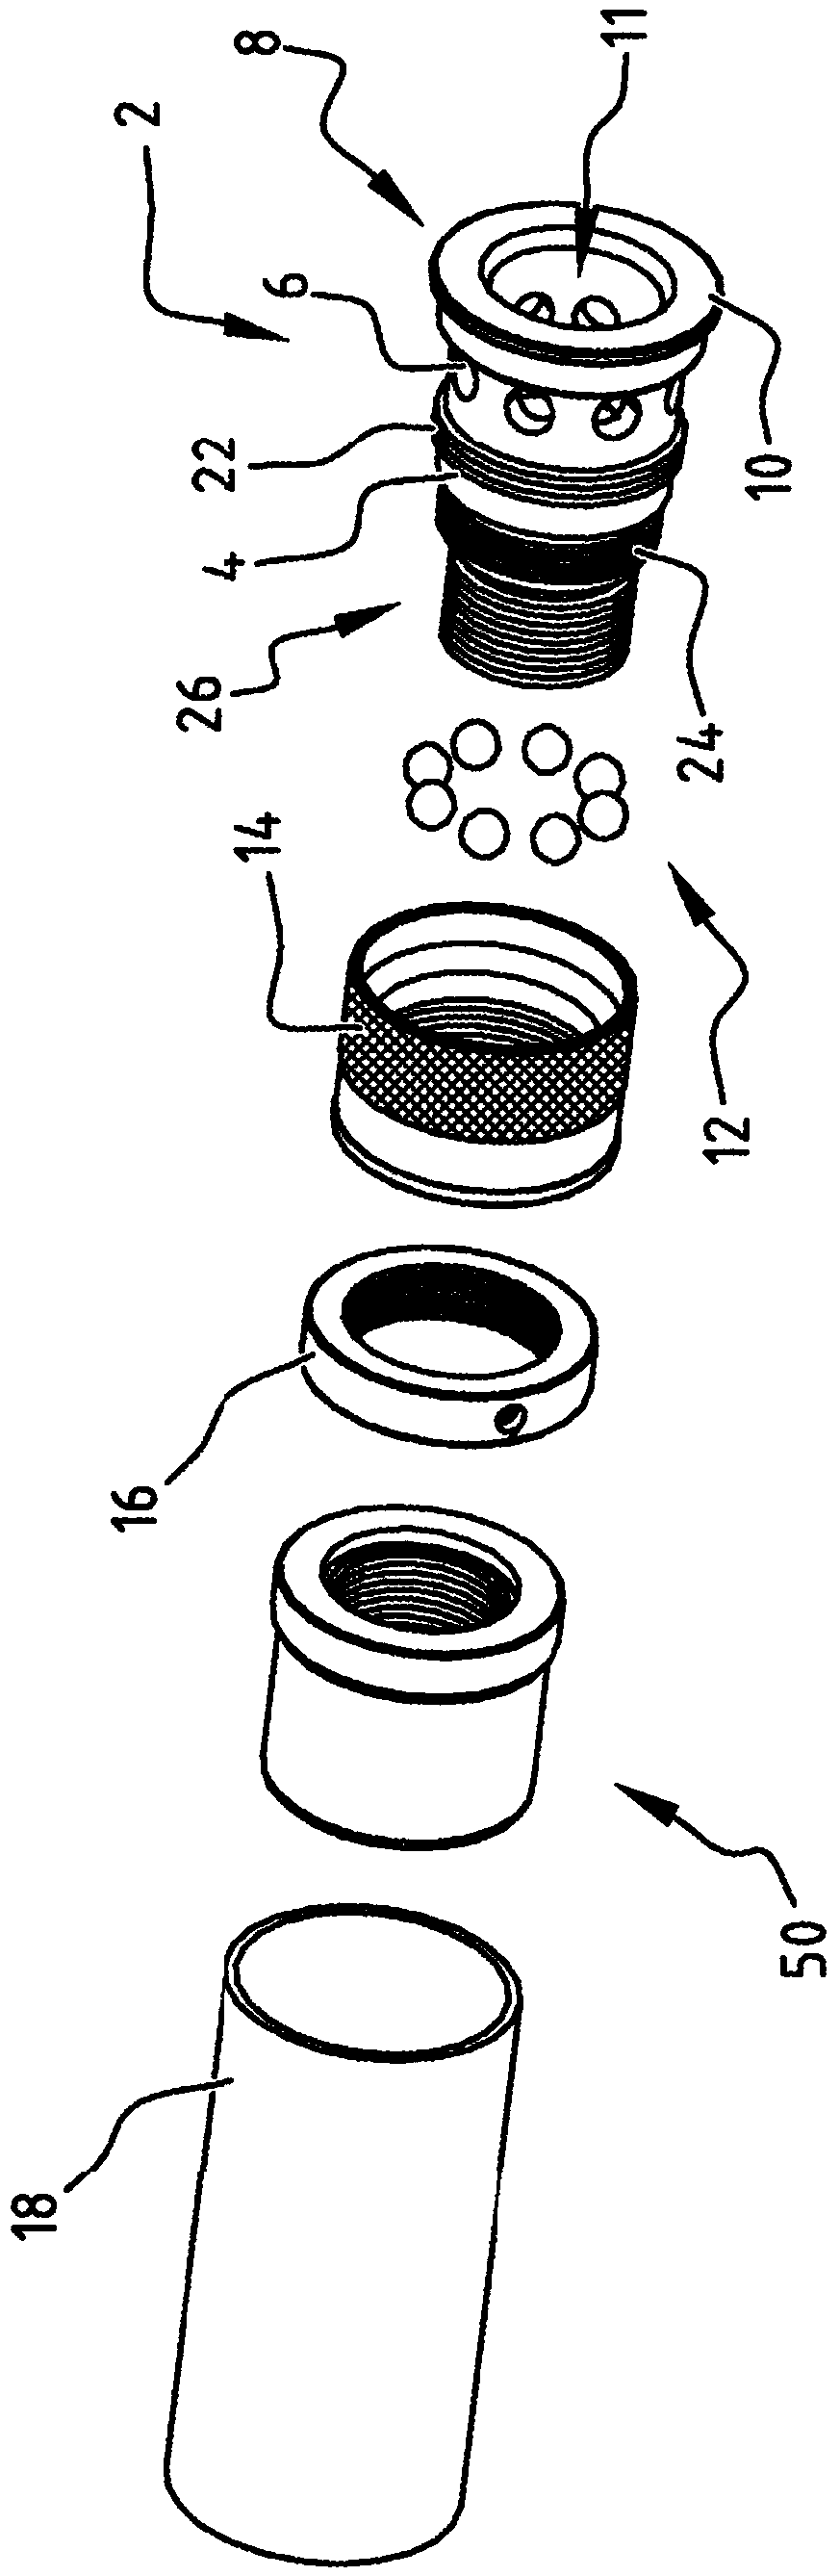 Coupling for connecting construction parts, a truss provided therewith and associated method and use